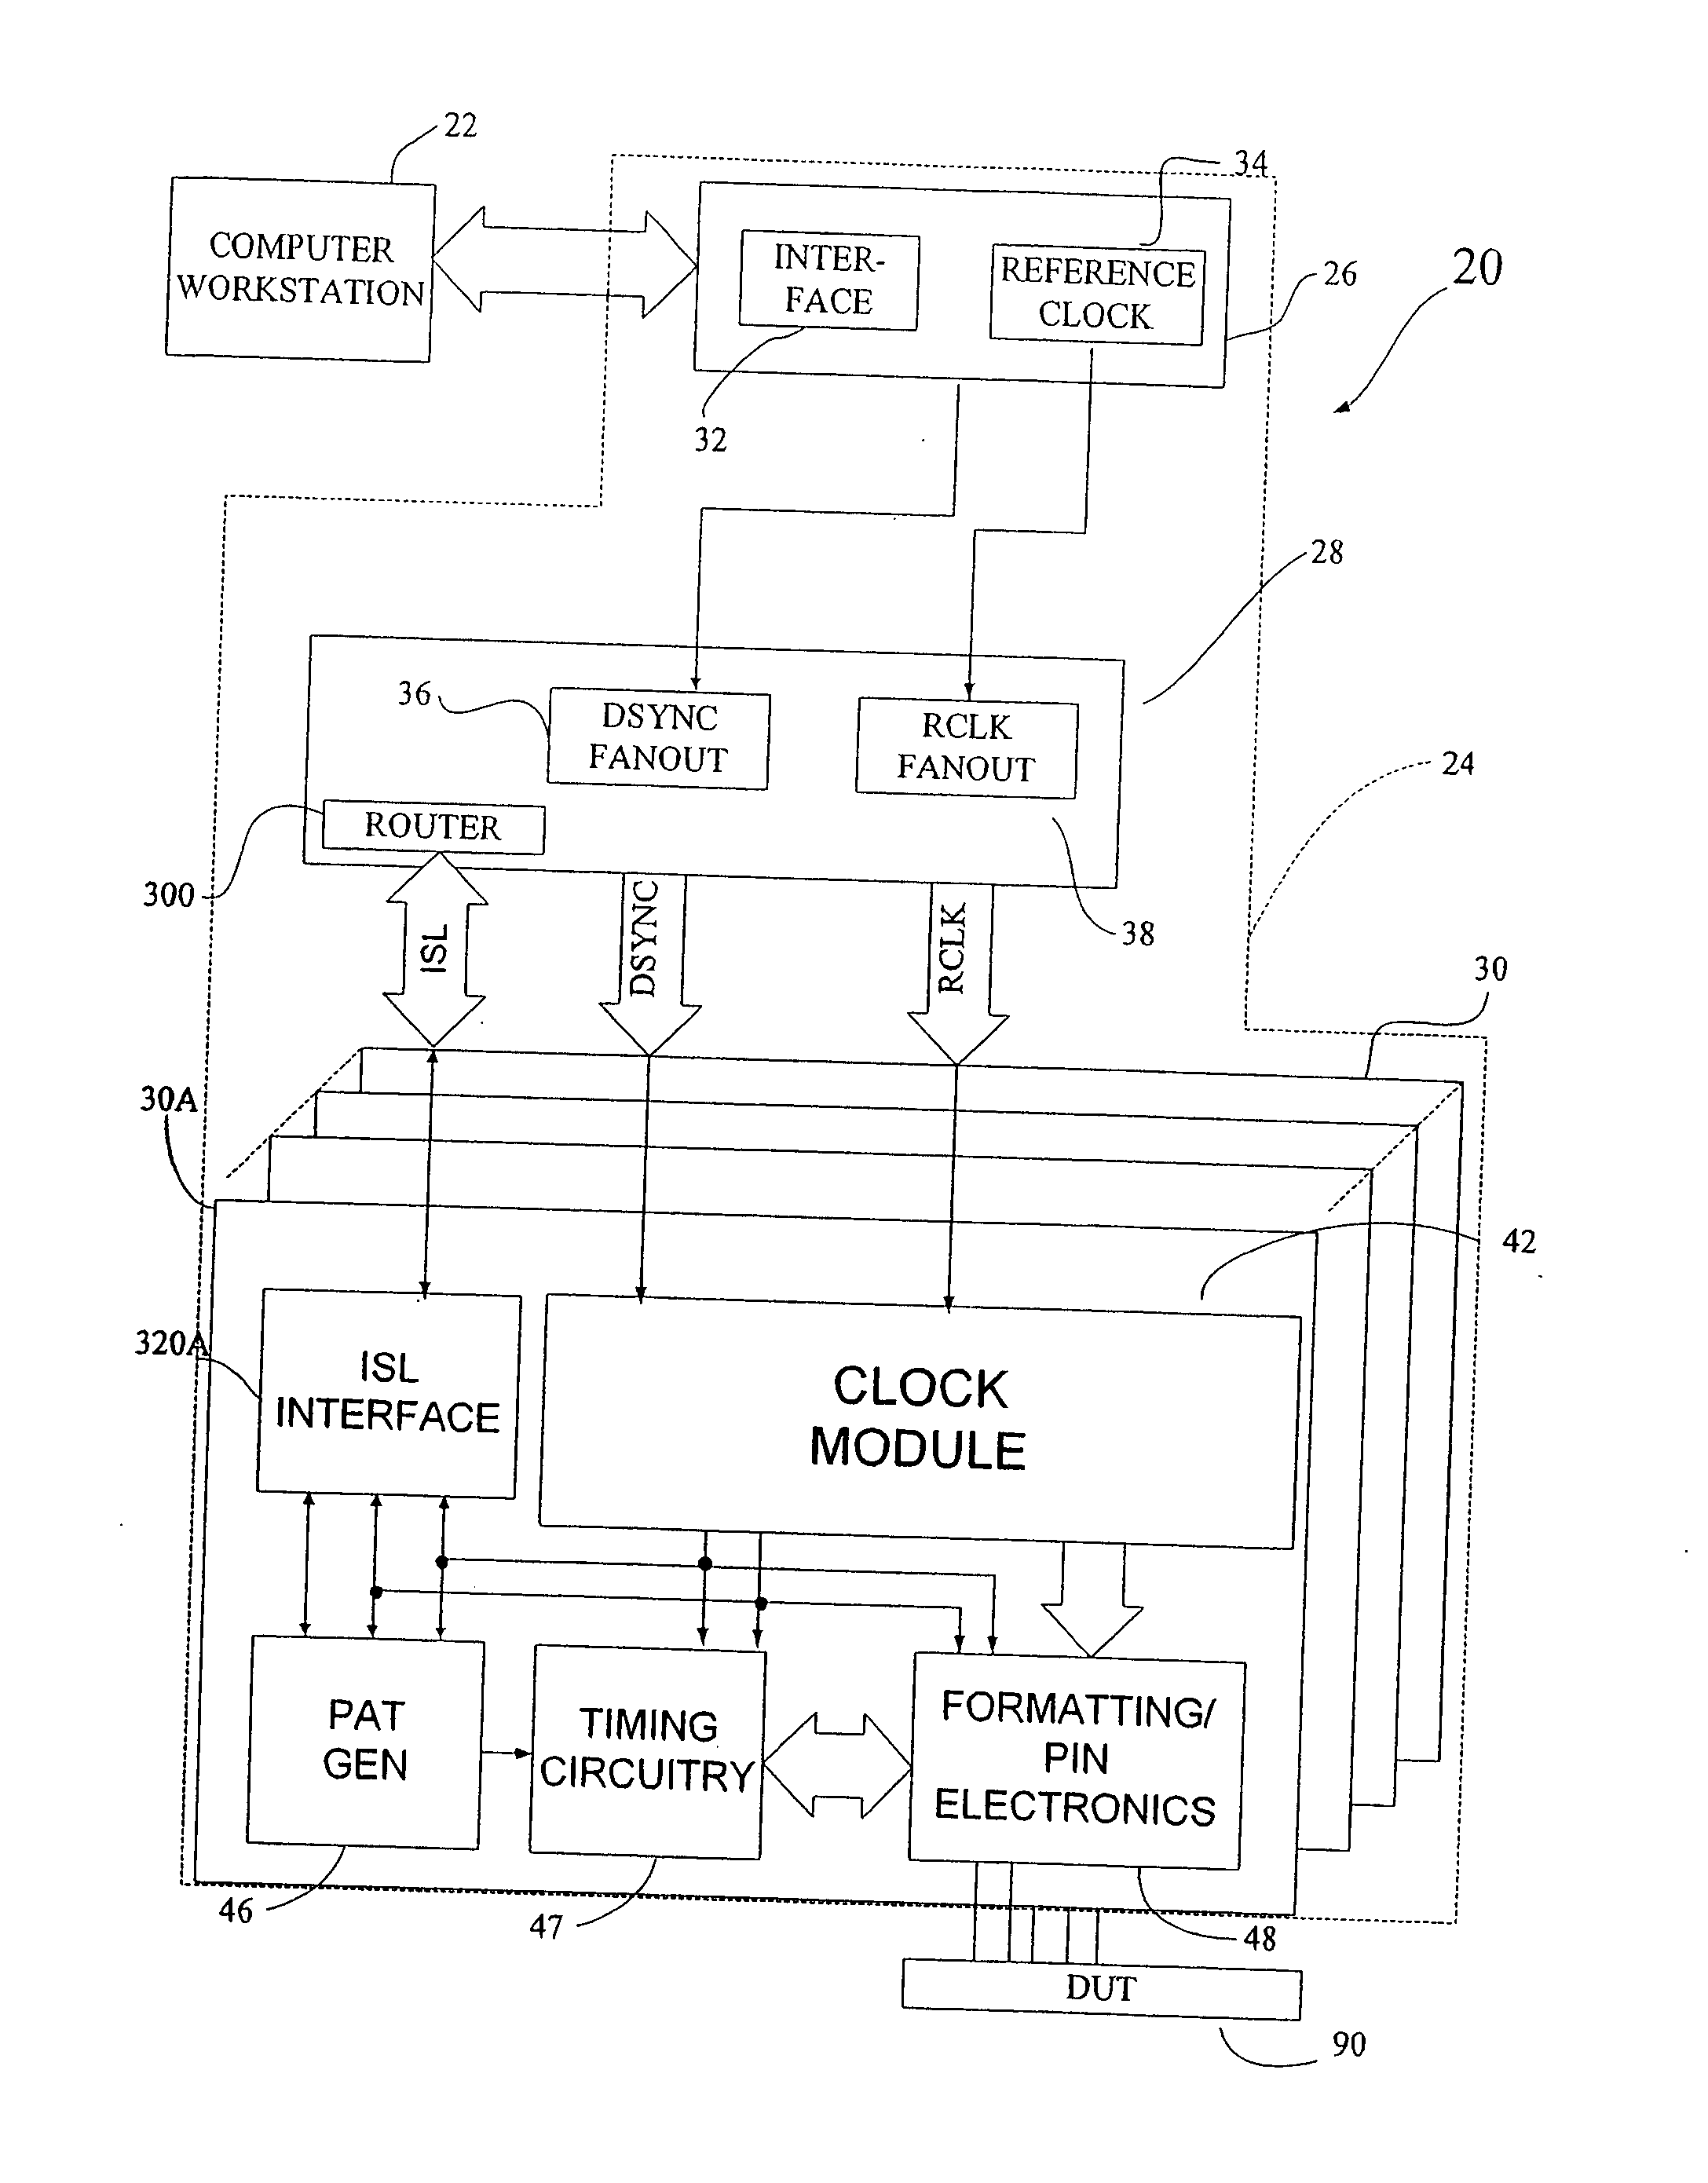 Instrument with interface for synchronization in automatic test equipment